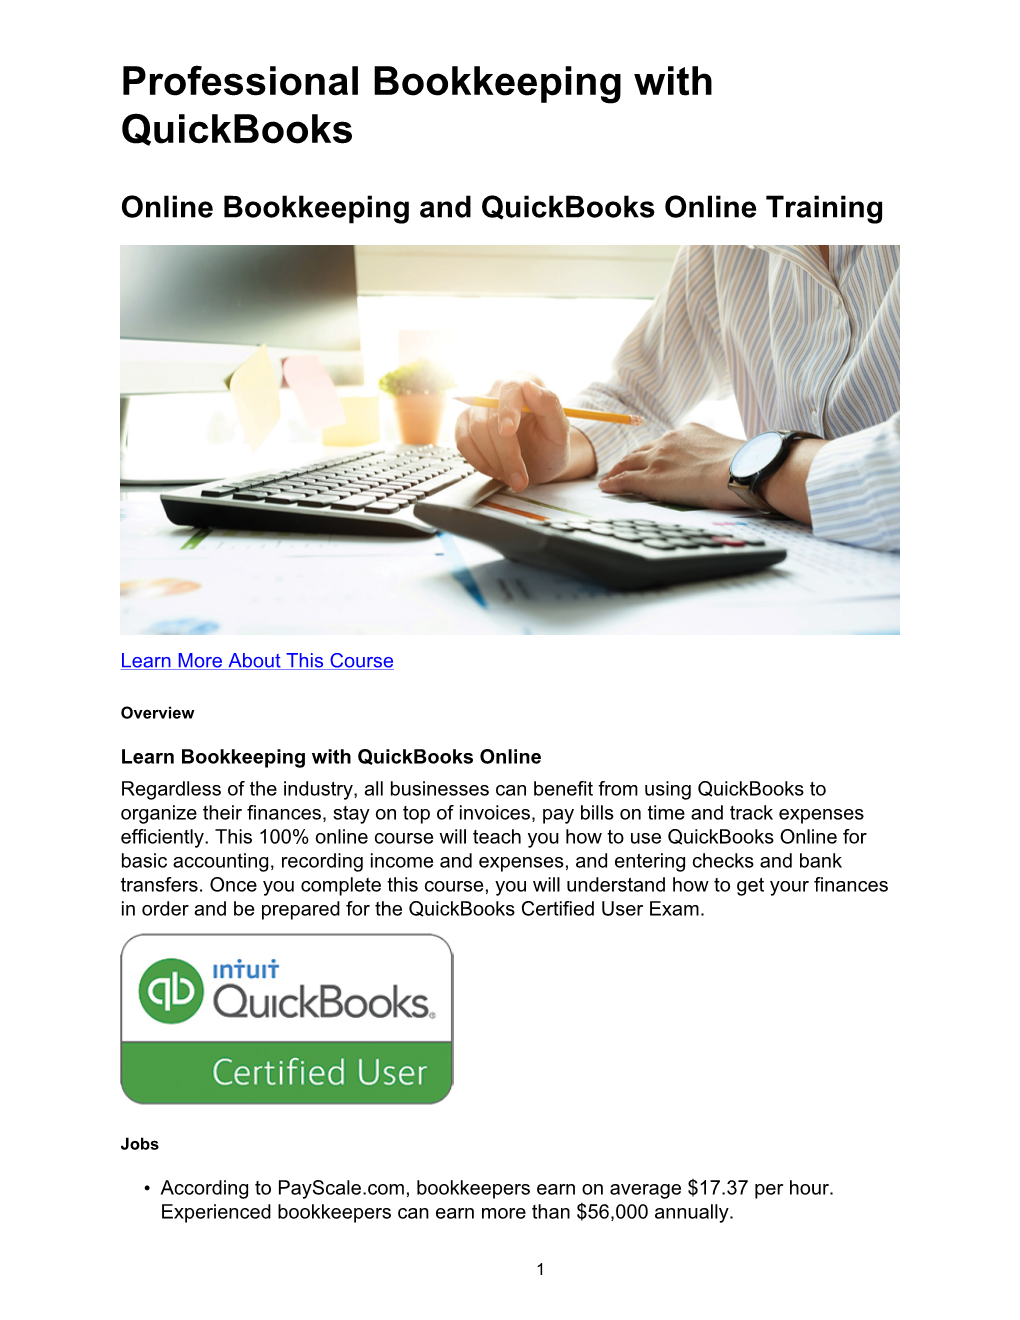 Professional Bookkeeping with Quickbooks